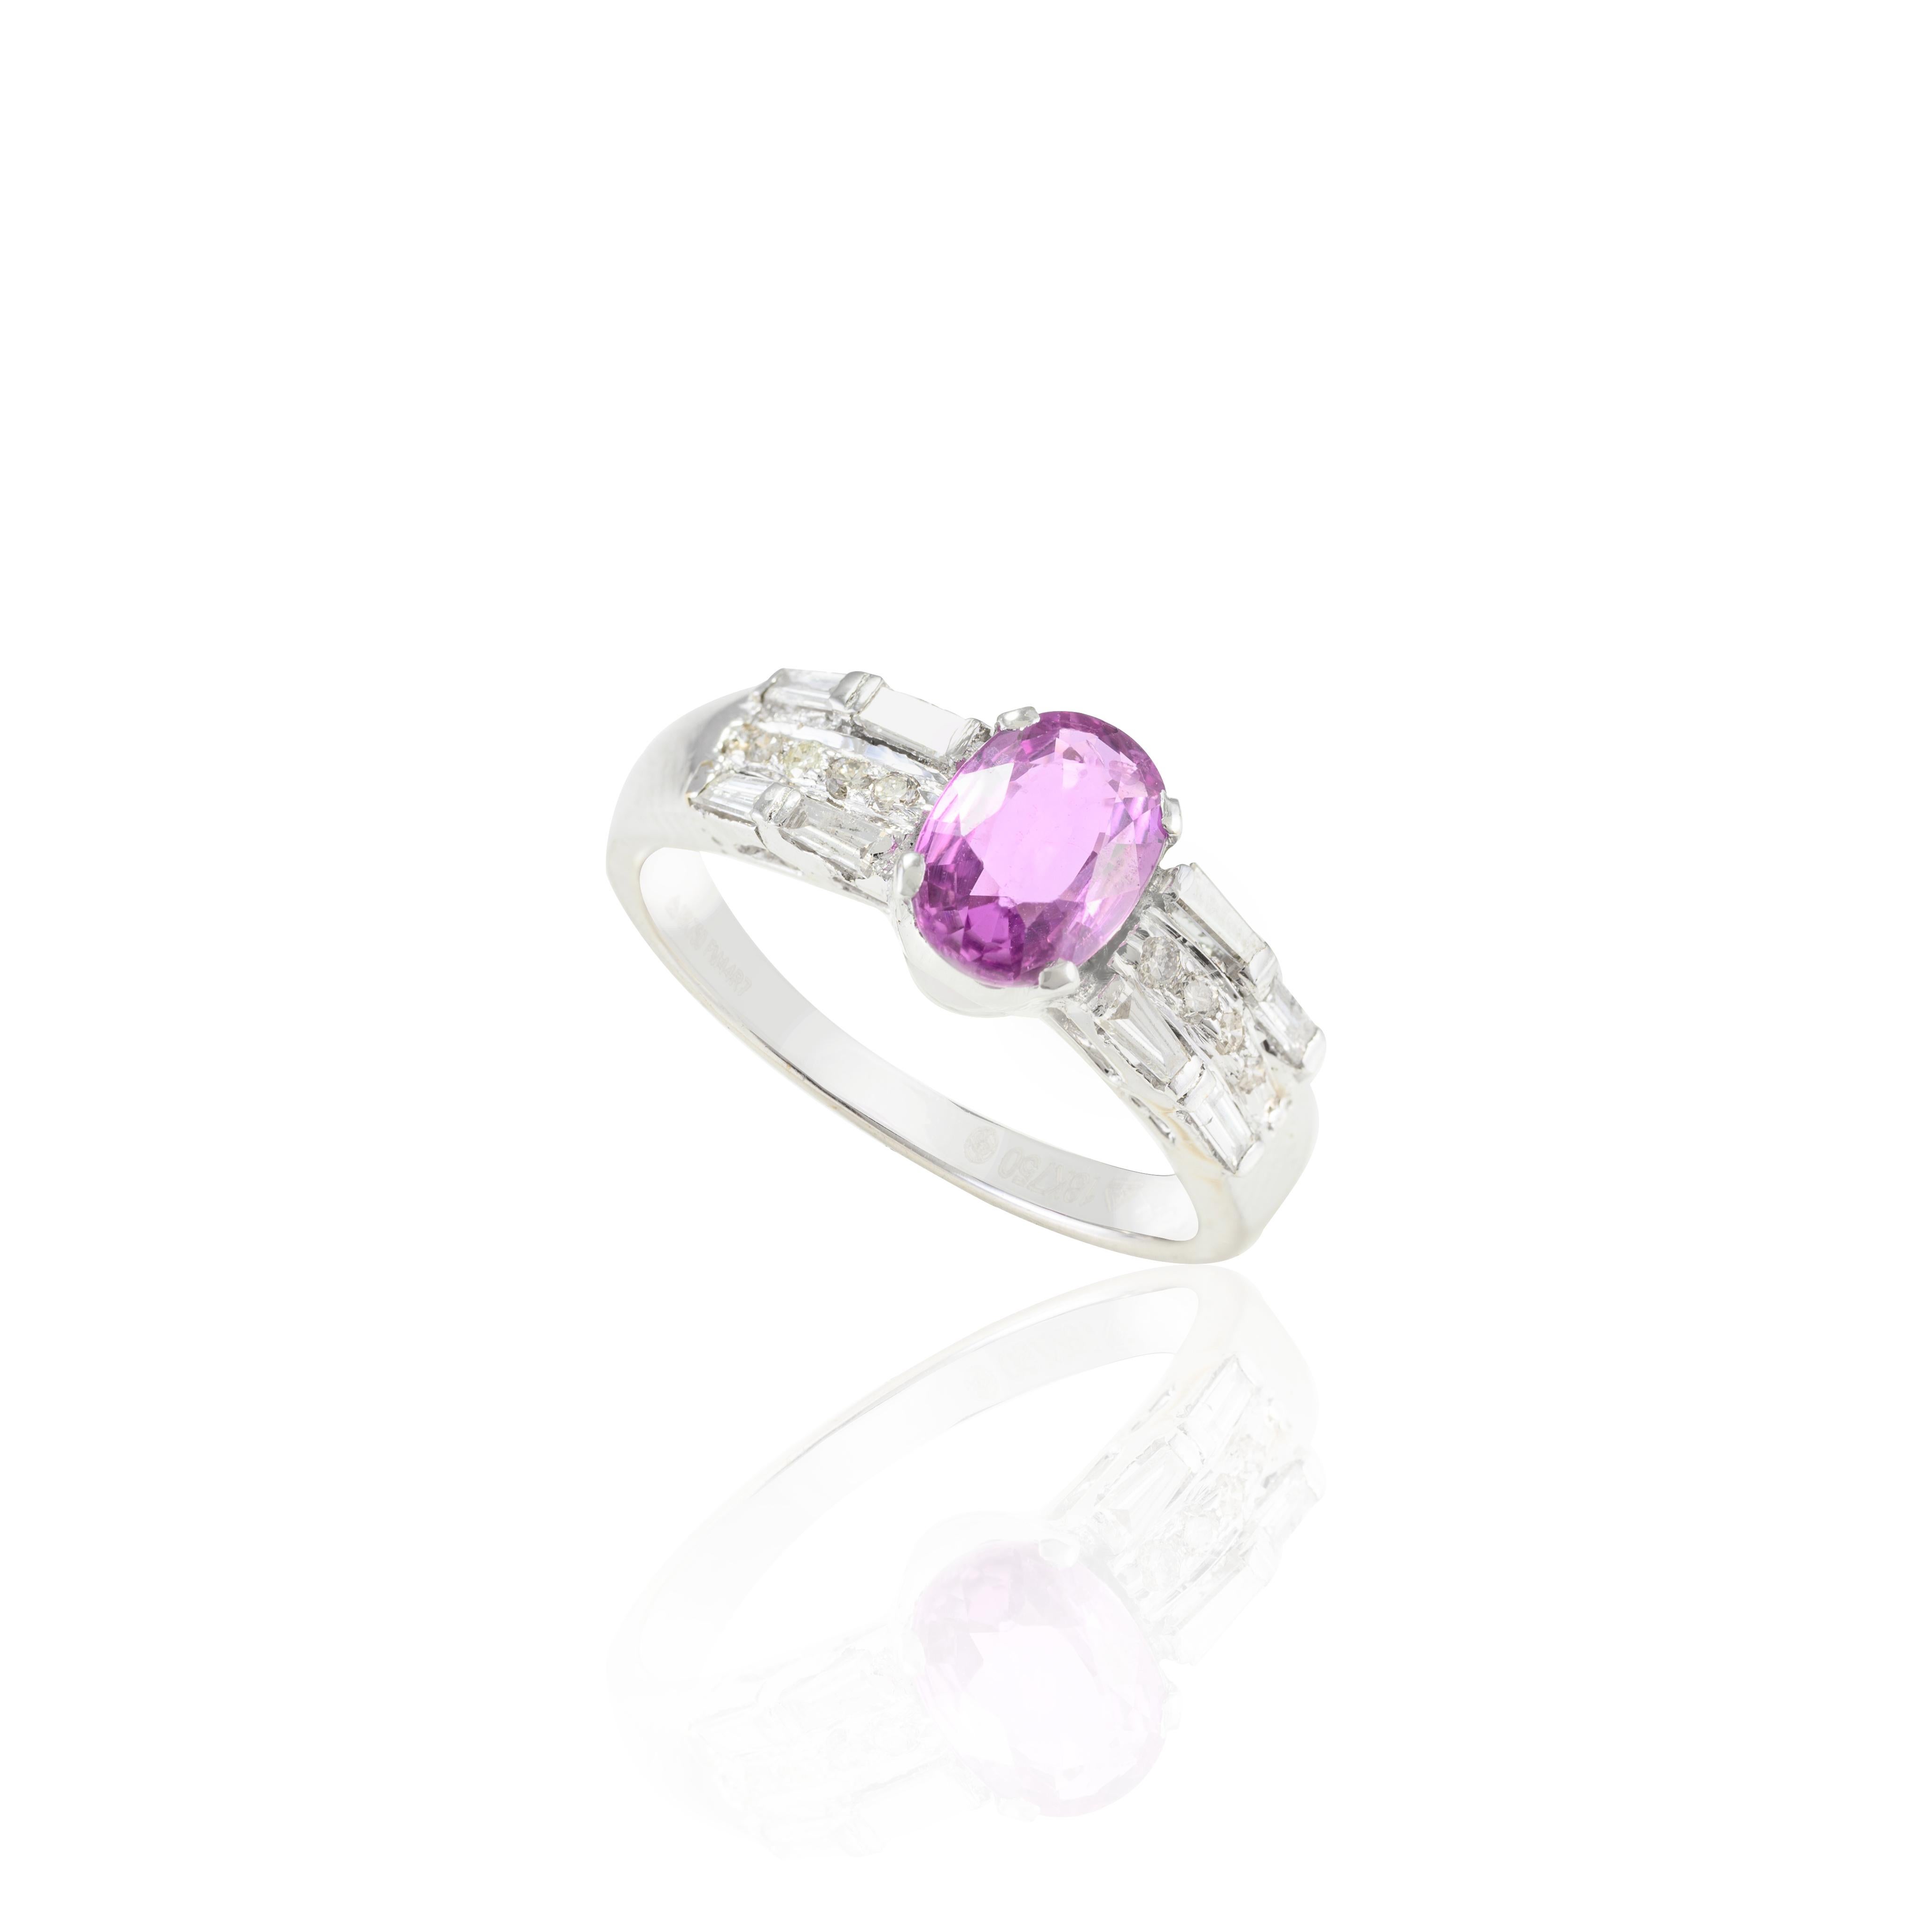 For Sale:  Oval Pink Sapphire Diamond Wedding Ring for Women in 18k White Gold 5